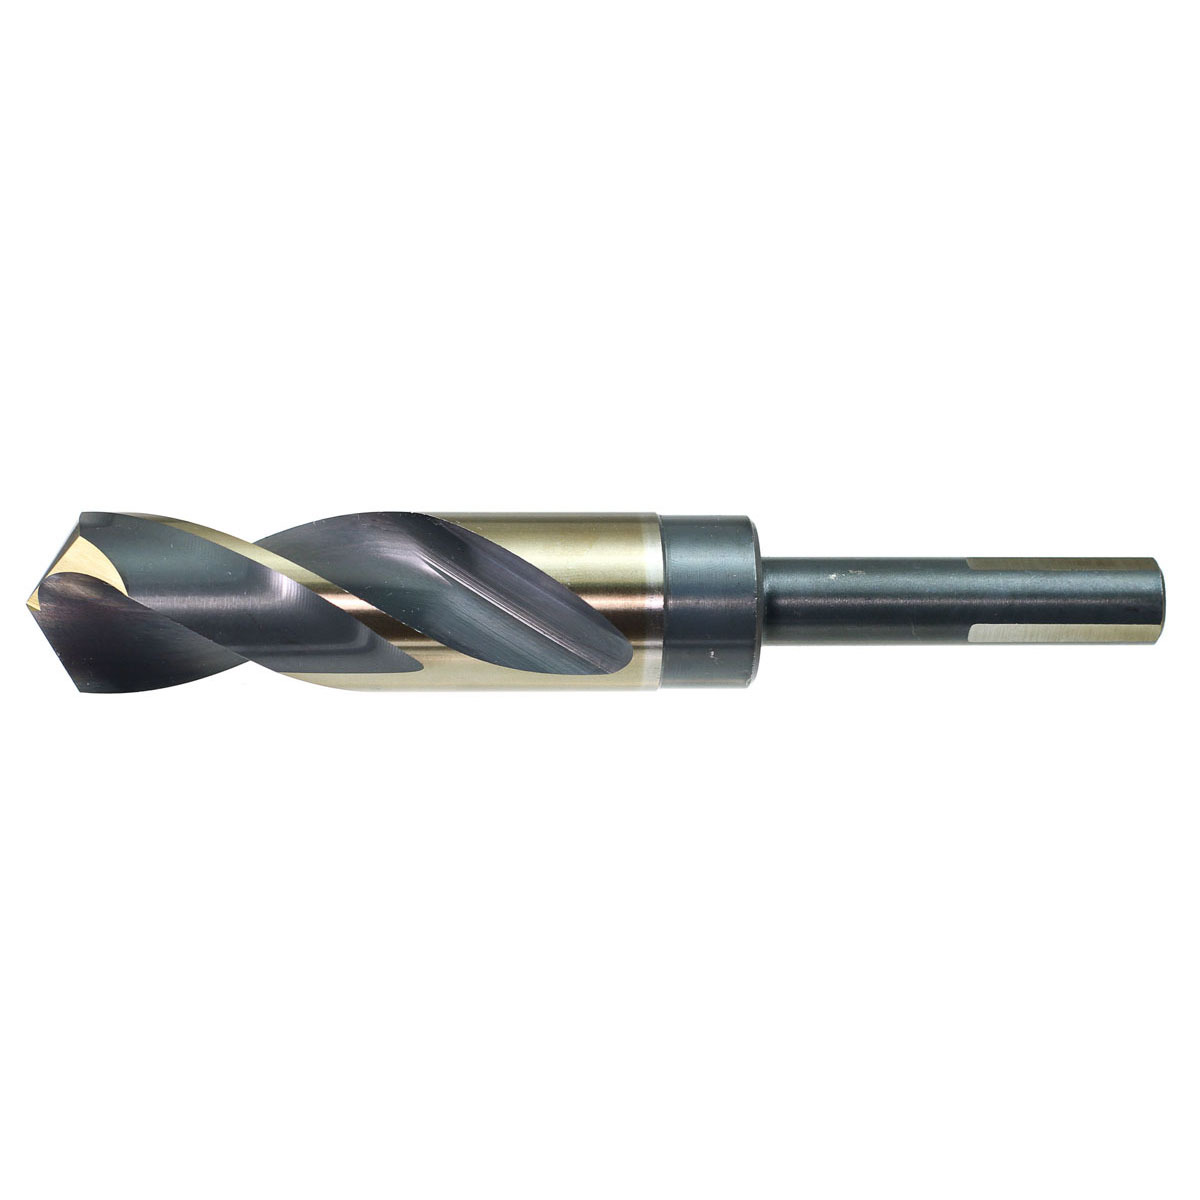 Slow Spiral 19/64 Diameter x 12 Length Straight Shank YG-1 D163 High Speed Steel Split Point Aircraft Extension Drill Bit N Size 135 Degree Pack of 5 Steam Oxide Finish 